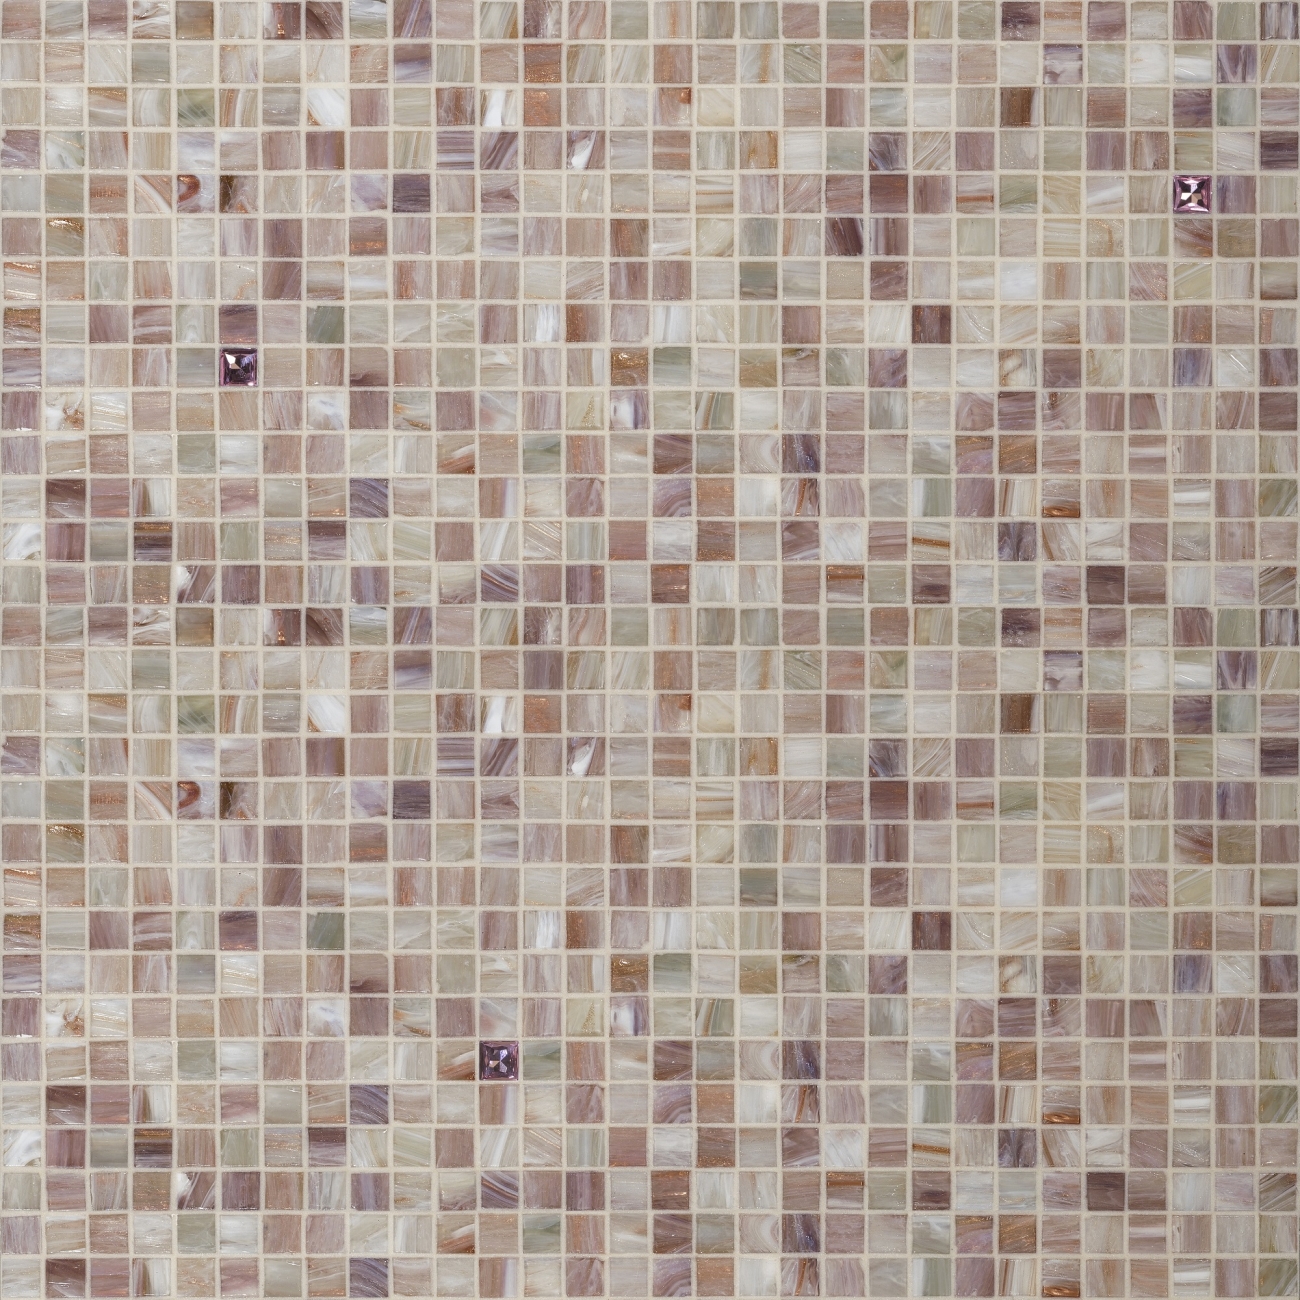 BISAZZA RODONITE THE CRYSTAL COLLECTION MOSAIC